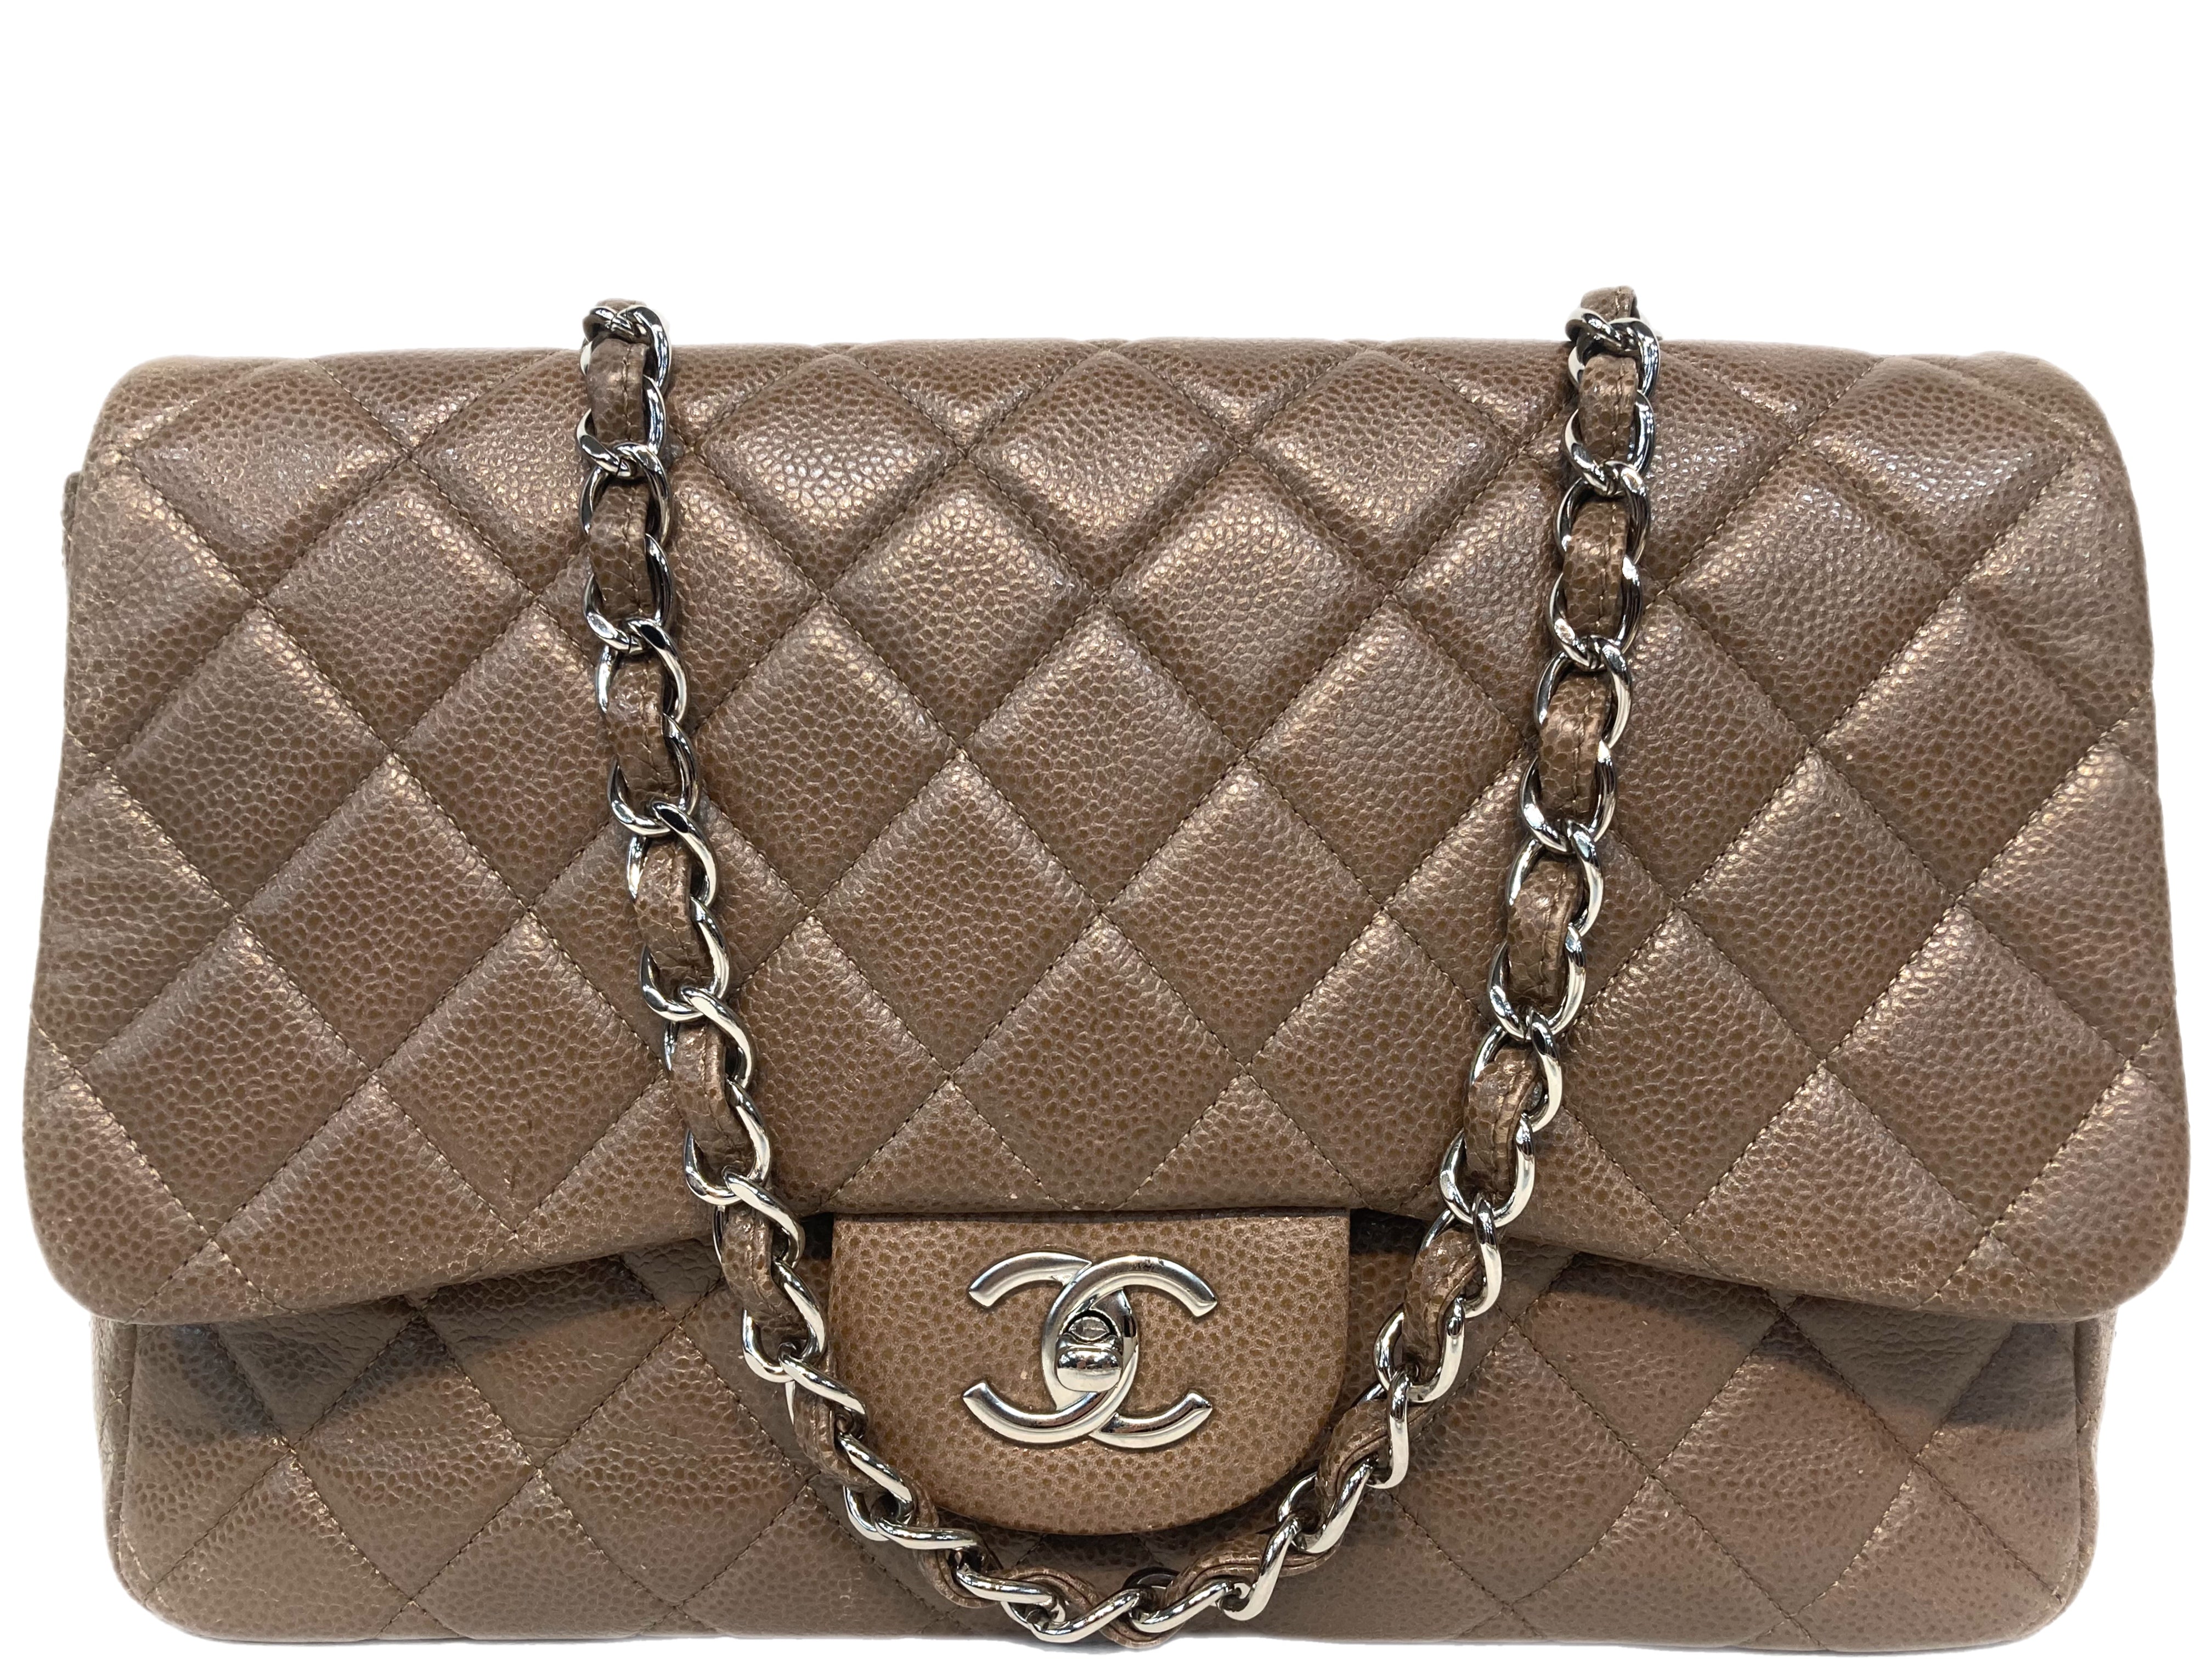 CHANEL Hobo Gabrielle bag in black and white leather - VALOIS VINTAGE PARIS